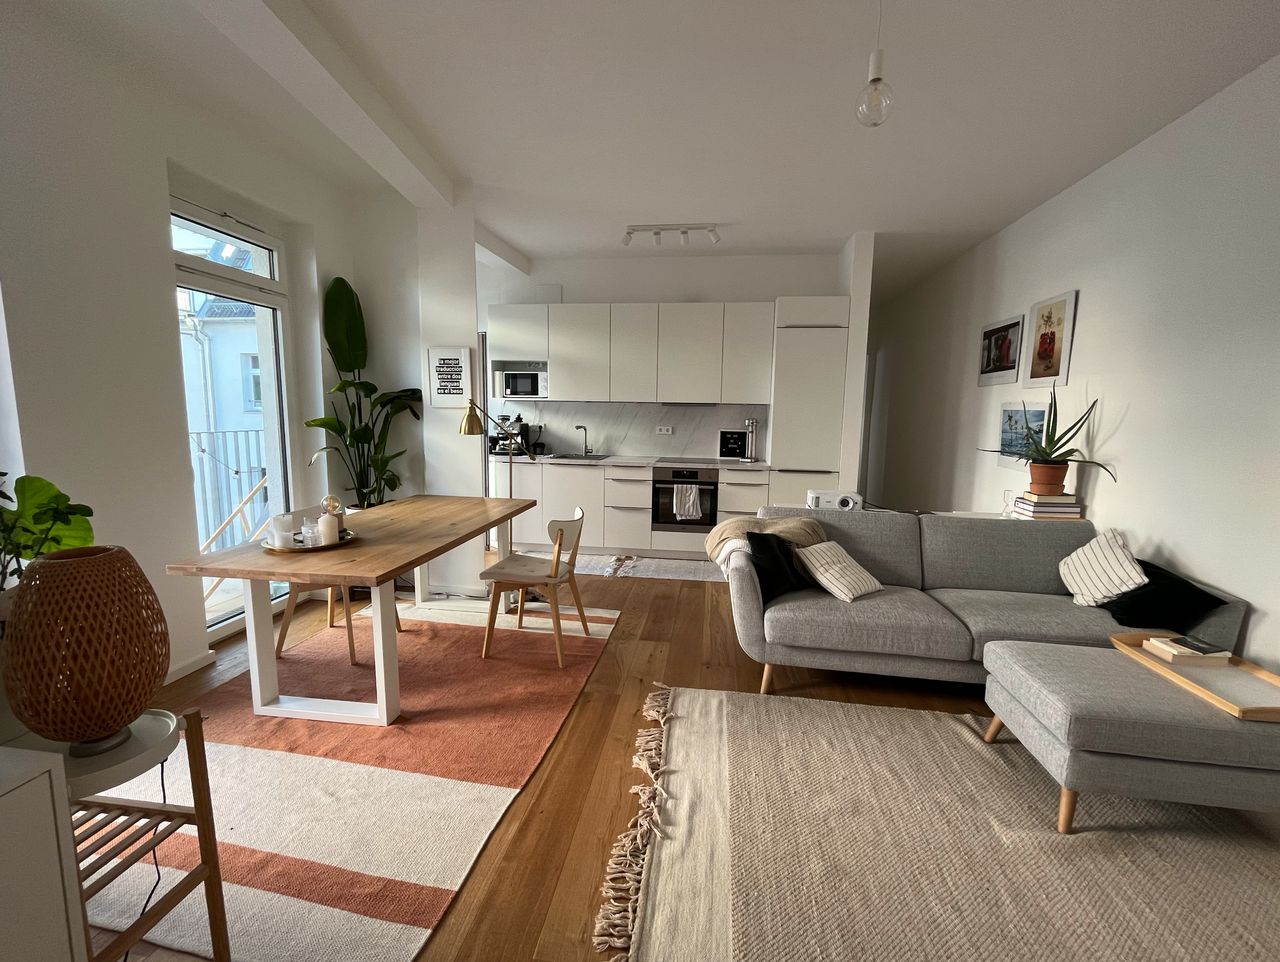 Spacious, light filled and fully furnished Neubau in Prenzlauer Berg